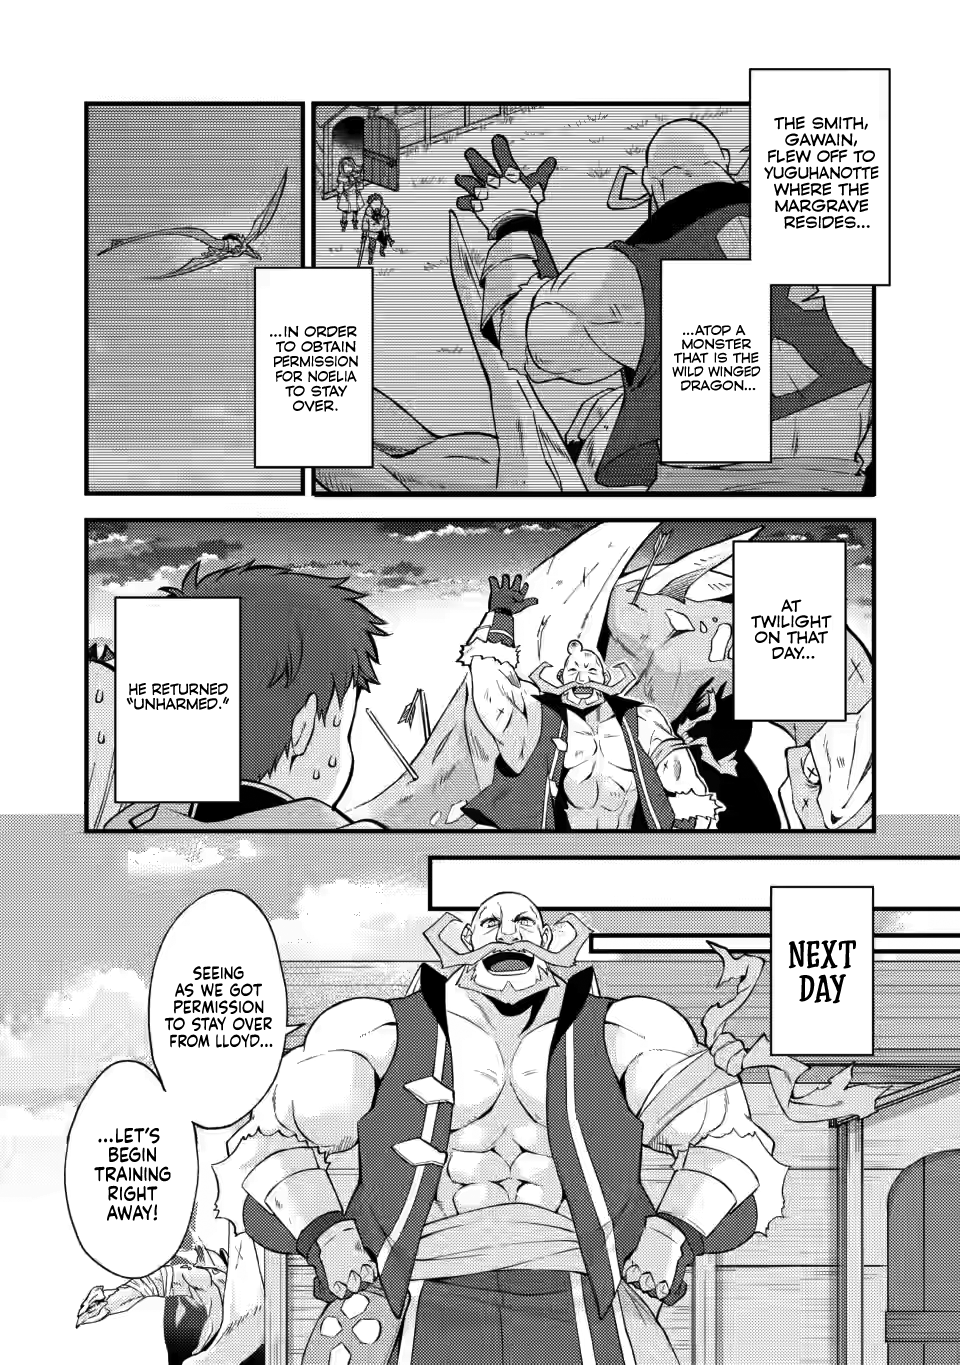 A Sword Master Childhood Friend Power Harassed Me Harshly, So I Broke Off Our Relationship And Made A Fresh Start At The Frontier As A Magic Swordsman - Page 1